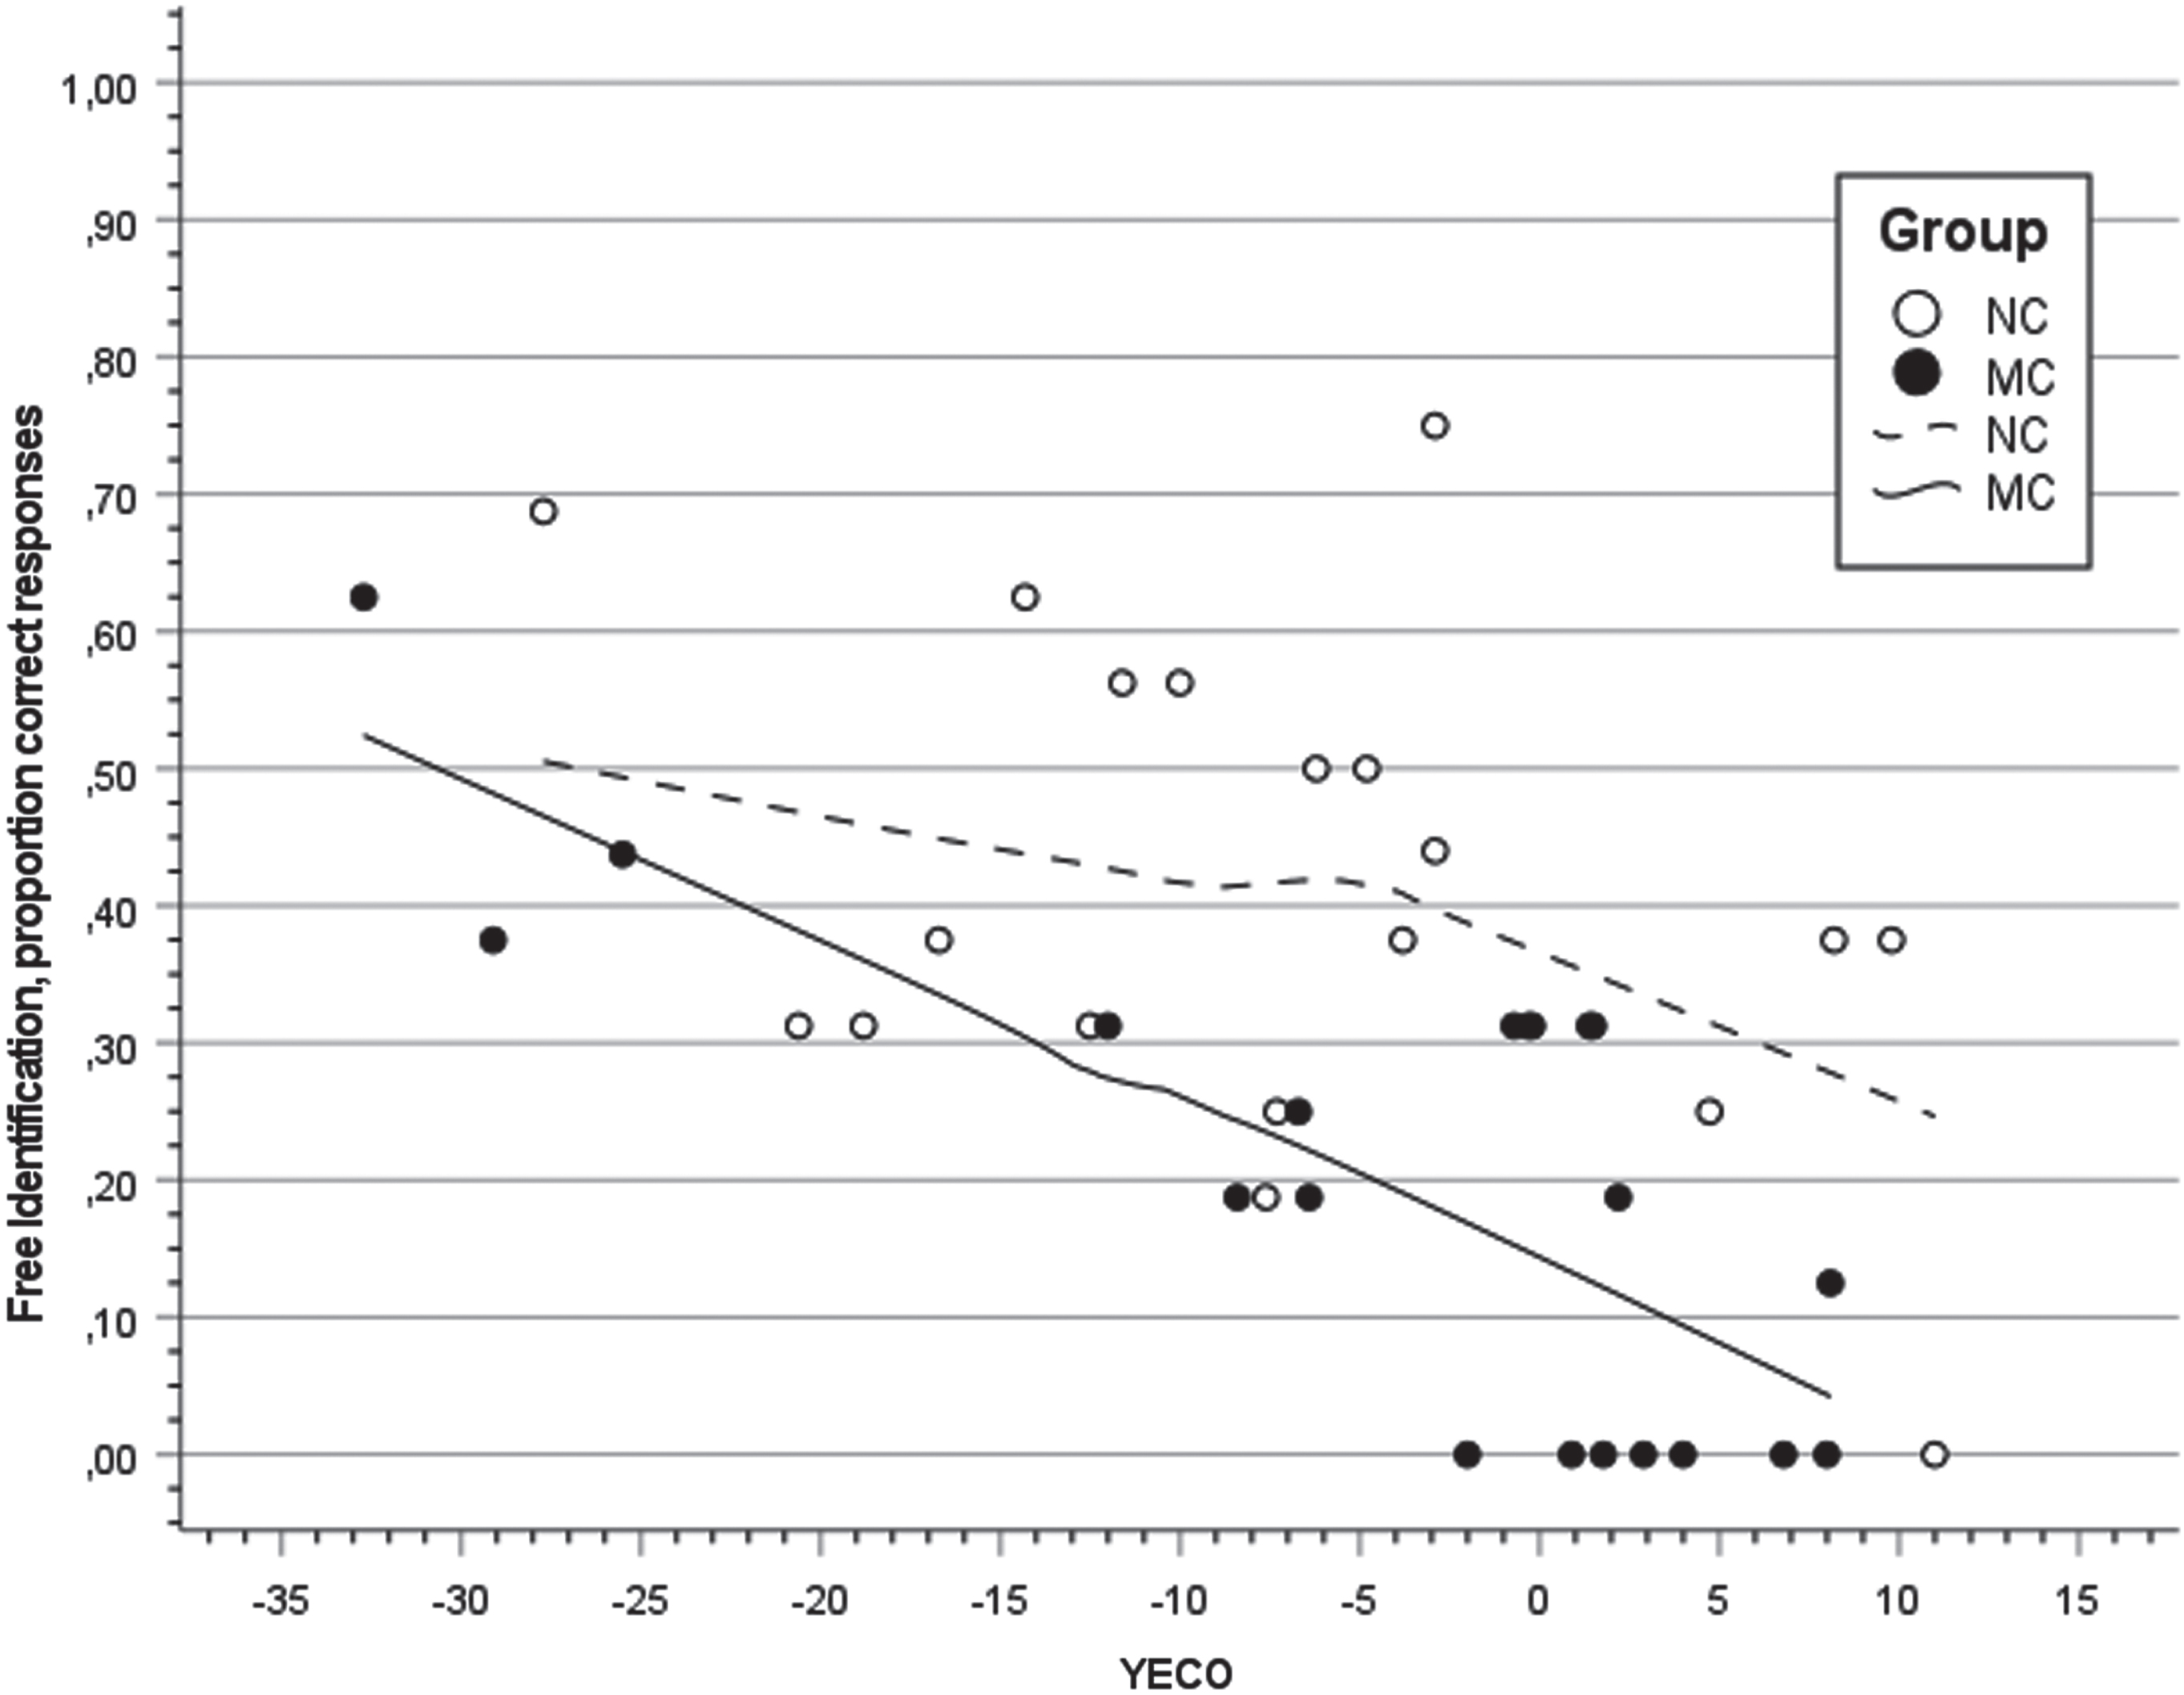 Scatter plot and regression lines with locally estimated smoothing for the proportion of free odor identification in relation to Years to Estimated Clinical Onset (YECO) inmutation carriers (MC; filled black) and non-carriers (NC; unfilled).